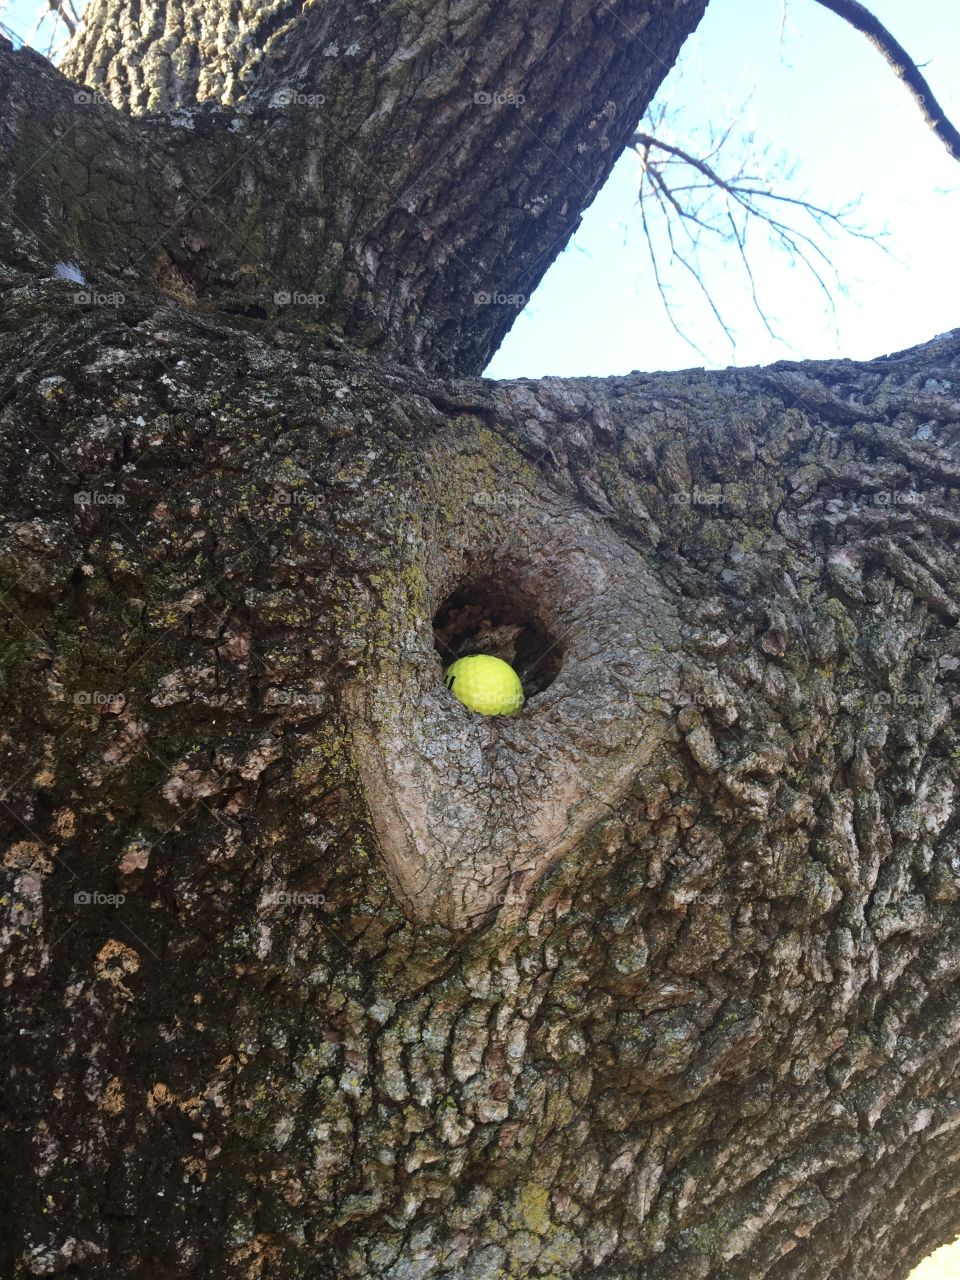 Gulf ball in a knot in a tree pretty cool actually took the golf ball my bad! 